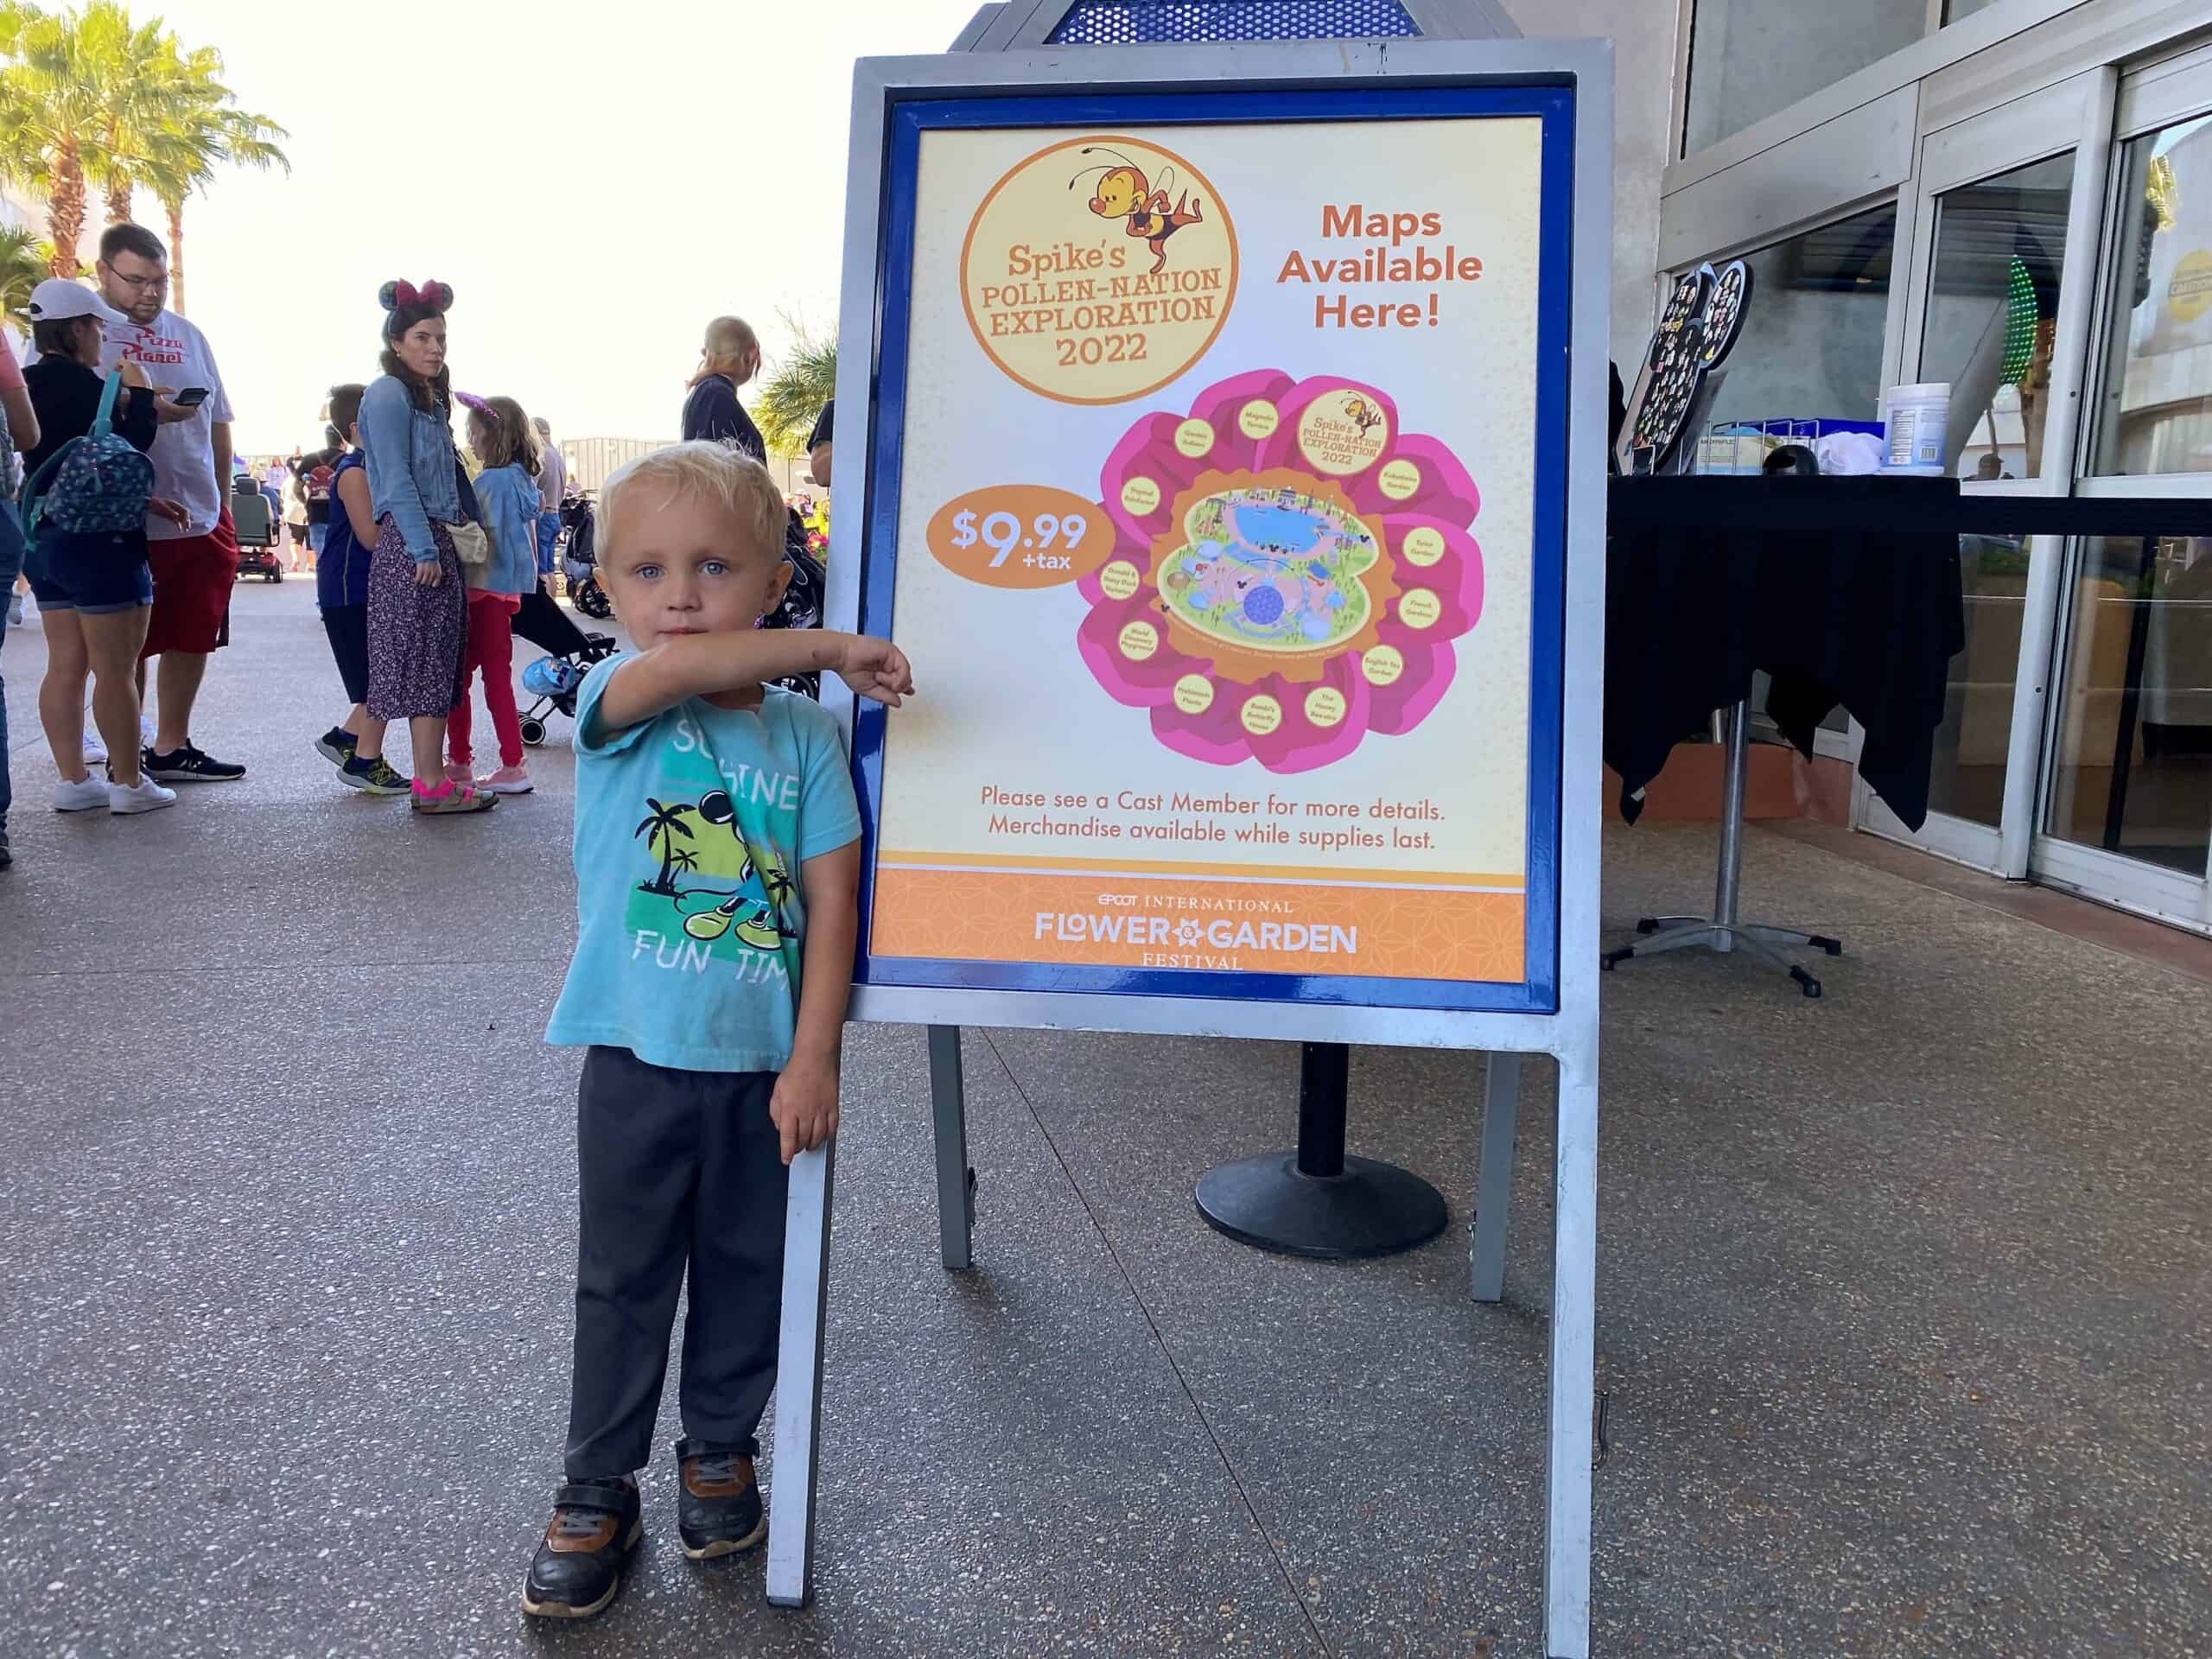 a four year old boy stands in front of a sign for Spike's Pollen-Nation Exploration Scavenger Hunt Flower and Garden 2022